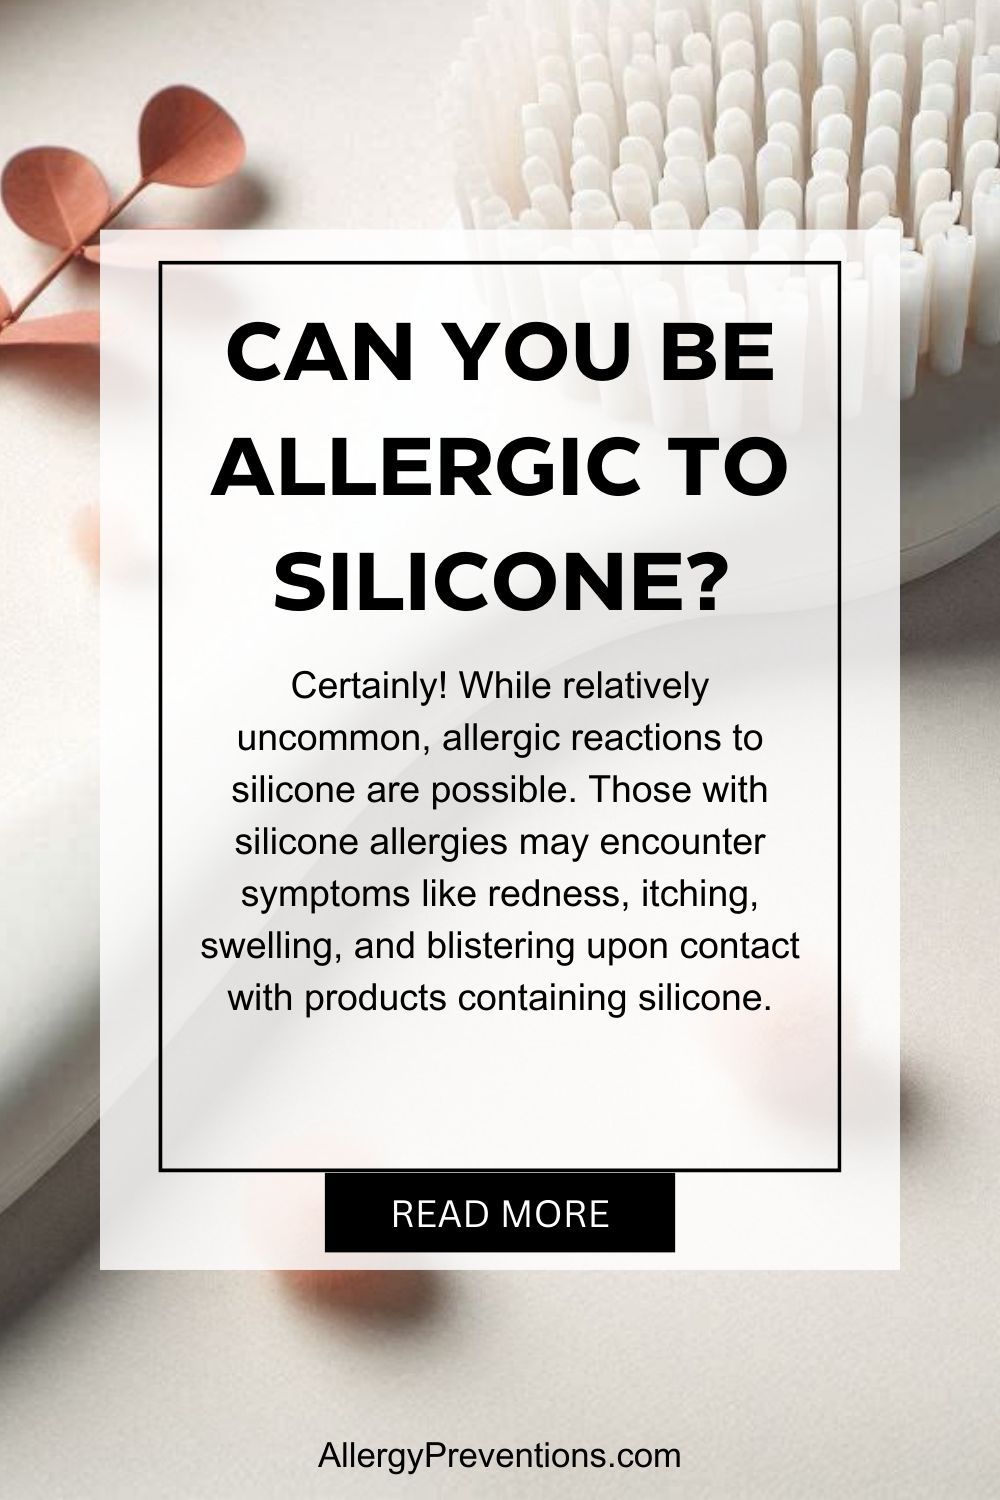 can you be allergic to silicone infographic. Can you be allergic to silicone? Certainly! While relatively uncommon, allergic reactions to silicone are possible. Those with silicone allergies may encounter symptoms like redness, itching, swelling, and blistering upon contact with products containing silicone.